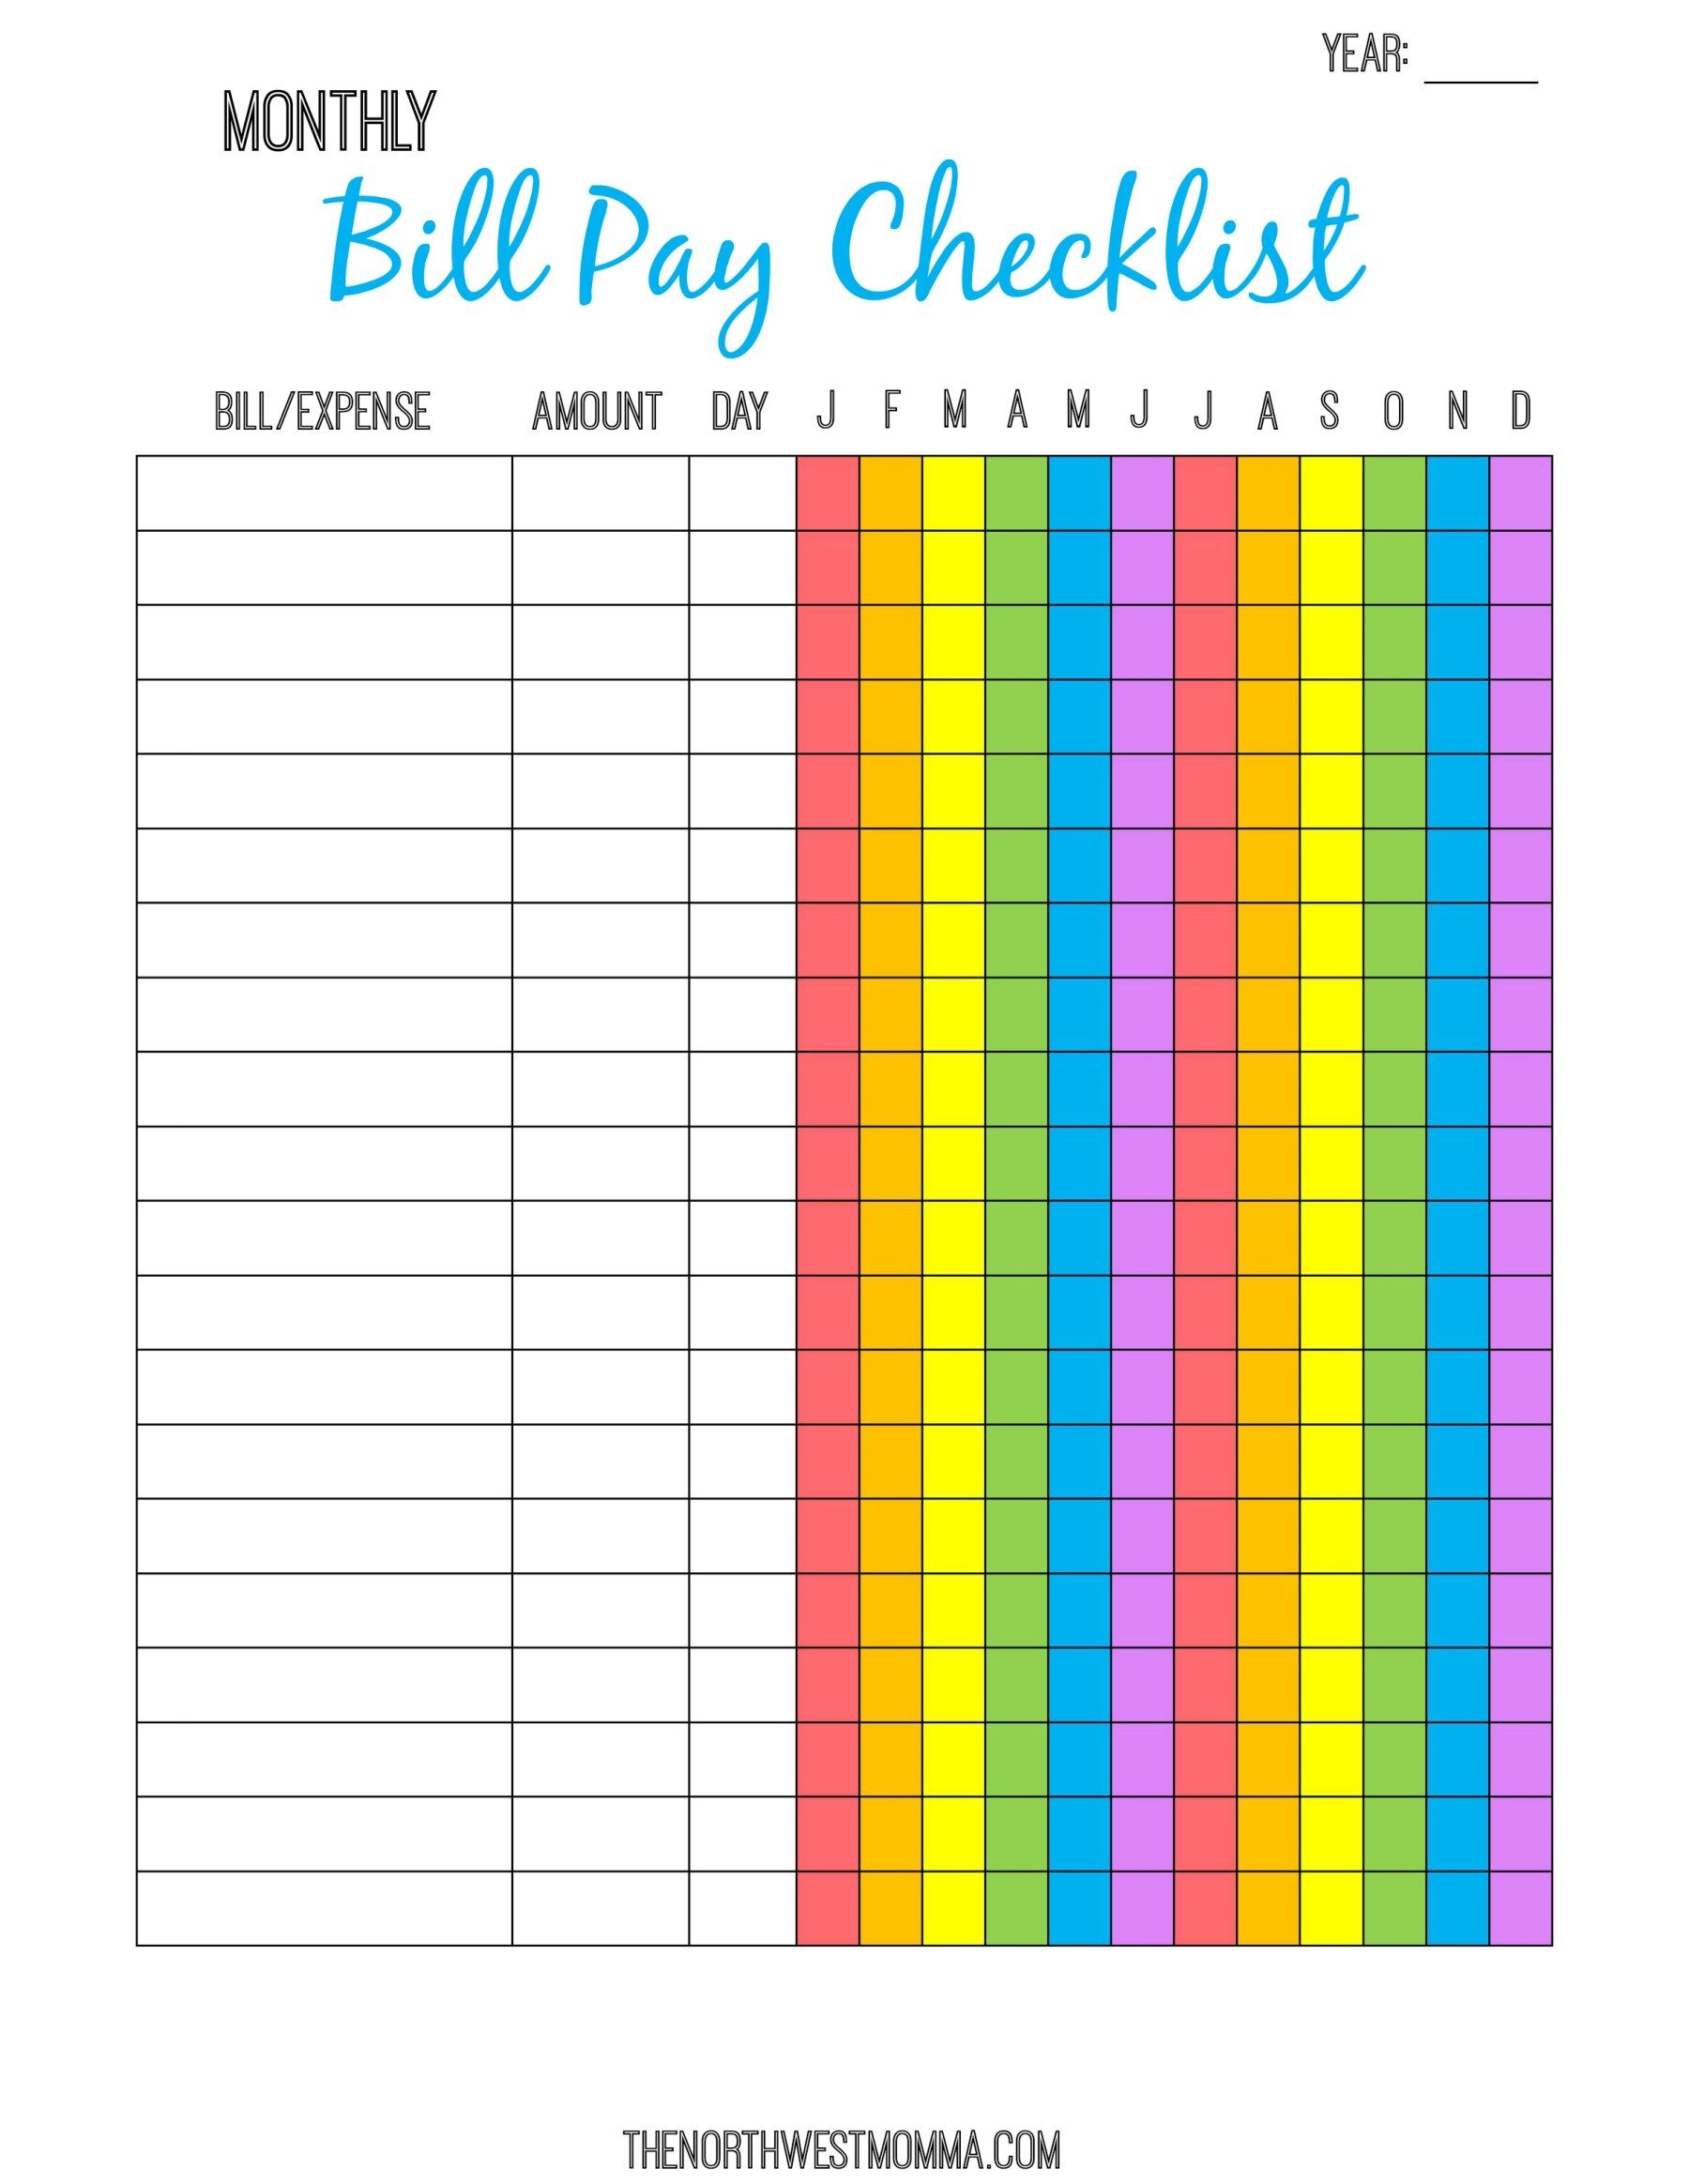 Monthly Bill Pay Checklist- Free Printable! | $ Saving Money - Free Printable Bill Pay Checklist